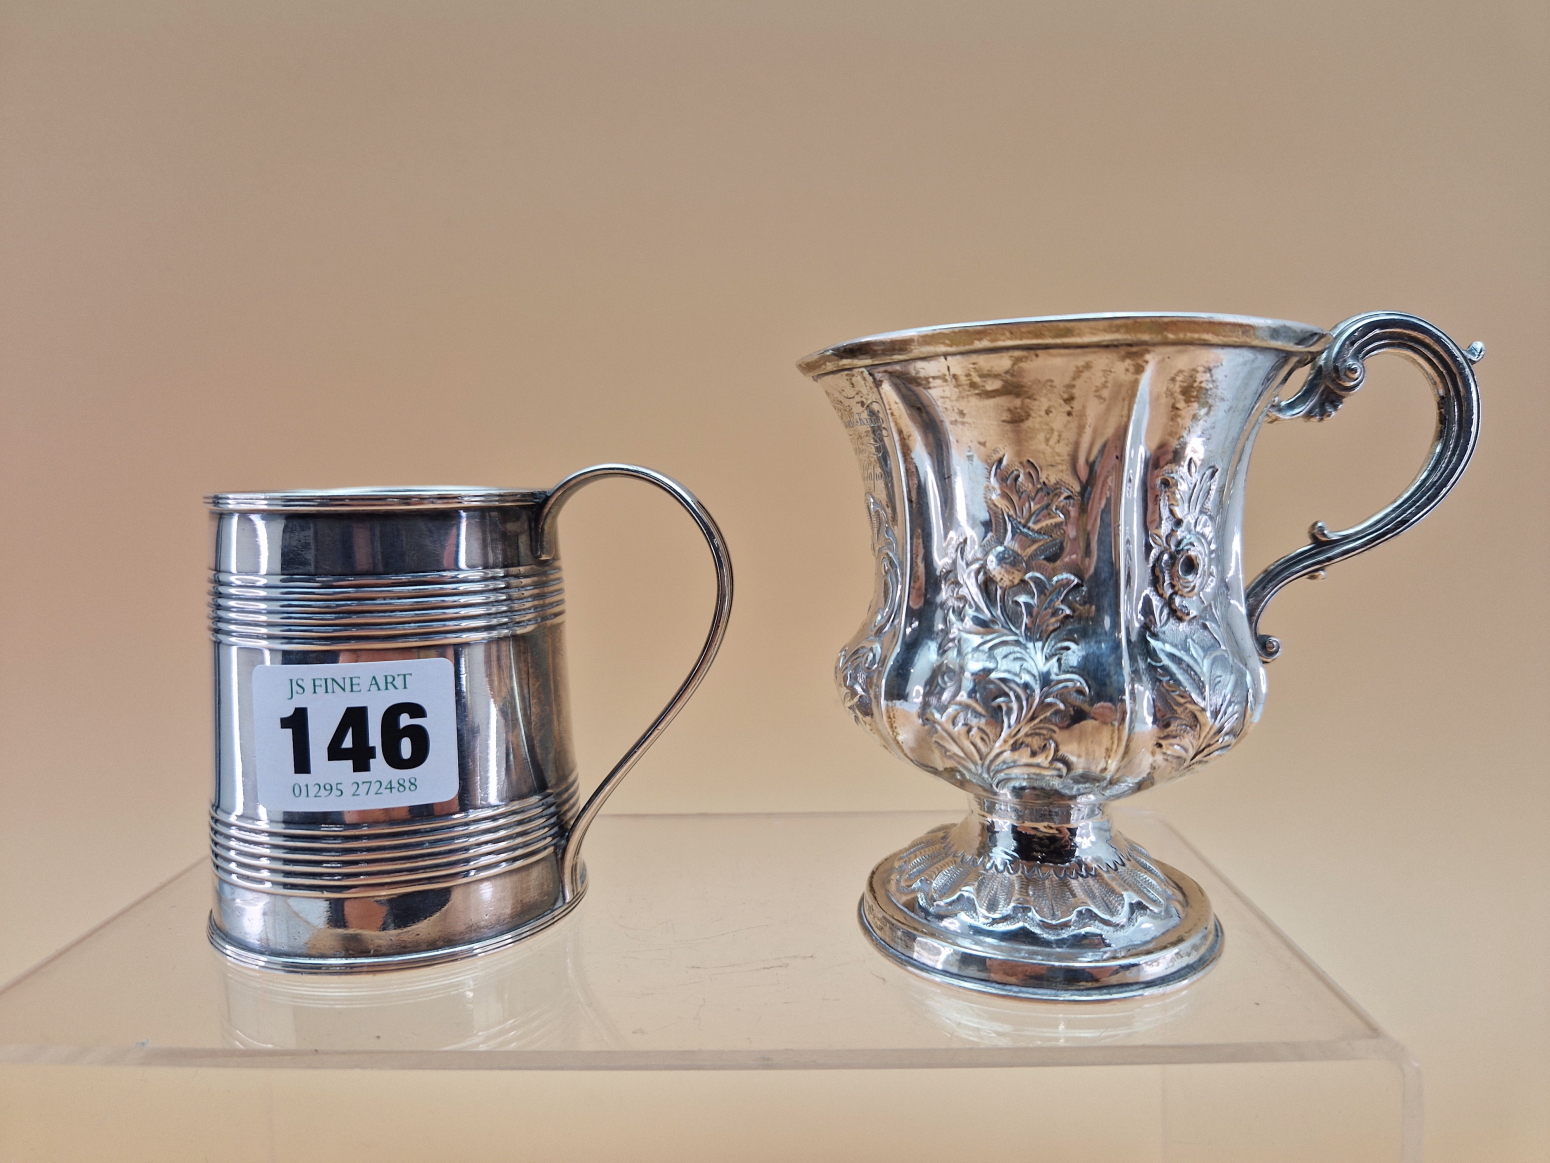 A VICTORIAN SILVER MUG BY WILLIAM HEWITT, LONDON 1838, EMBOSSED WITH FLOWERS TOGETHER WITH A QUARTER